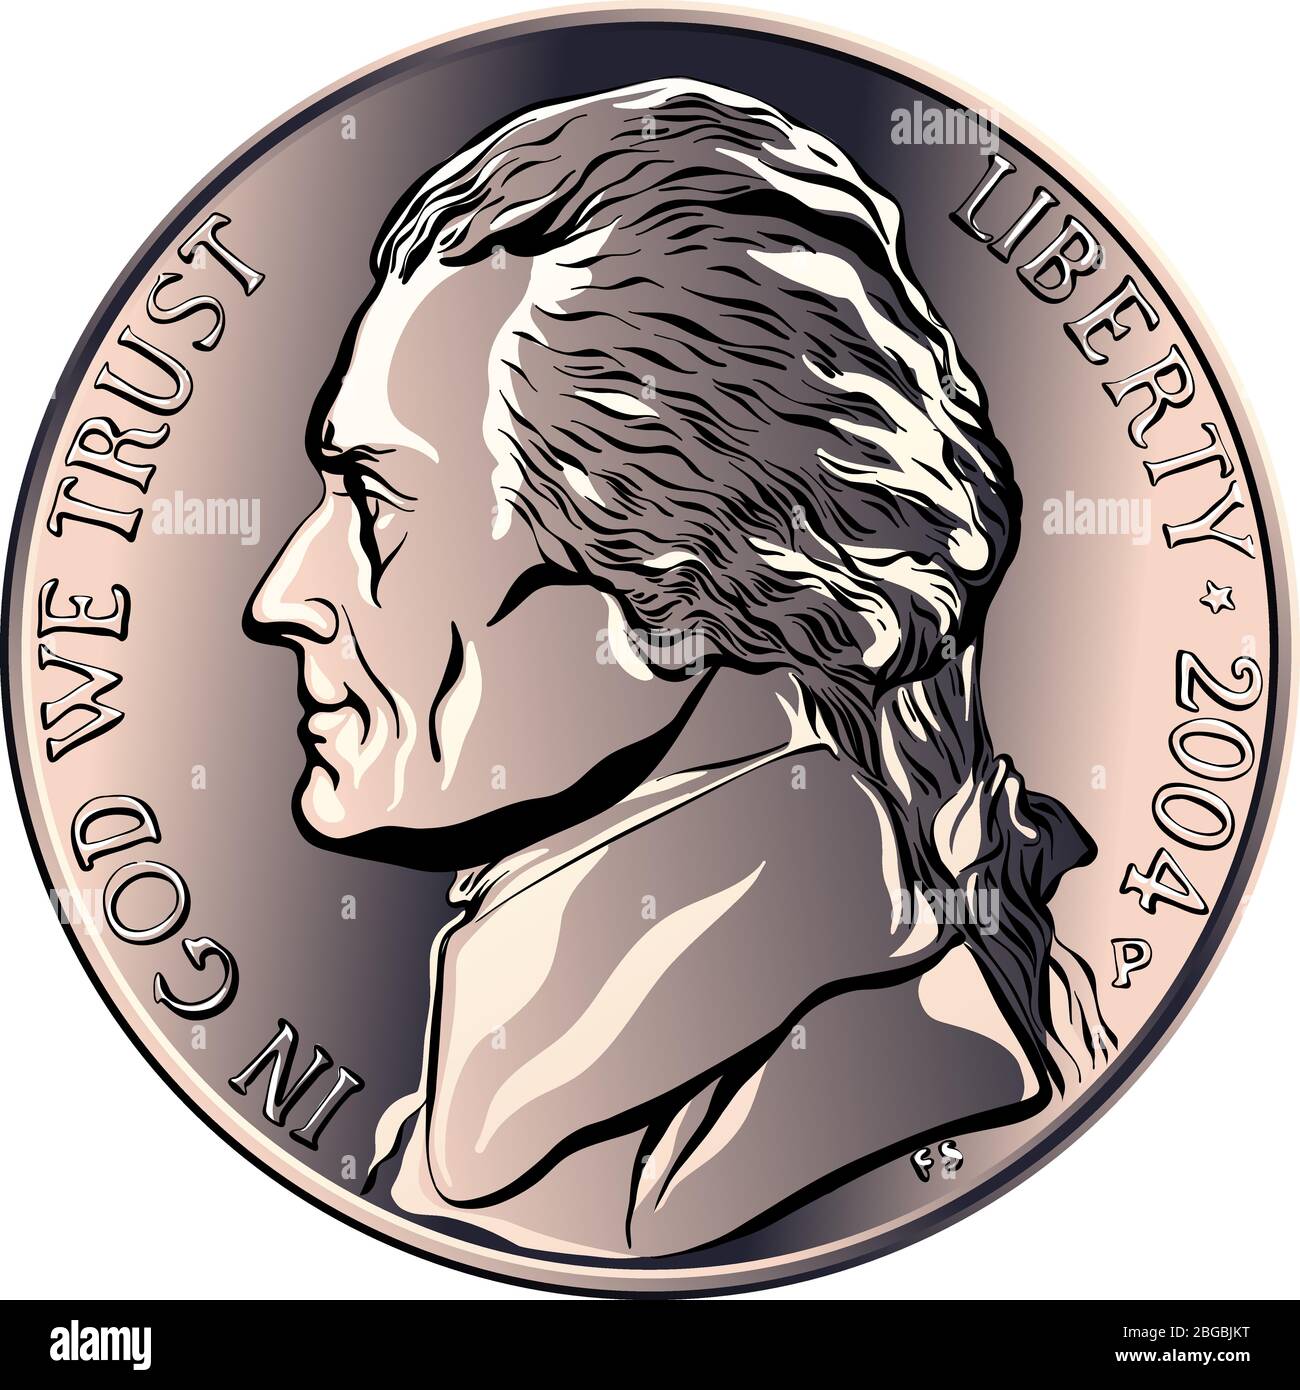 Jefferson nickel, American money, United States five-cent coin with profile Thomas Jefferson, third President of the United States on obverse Stock Vector